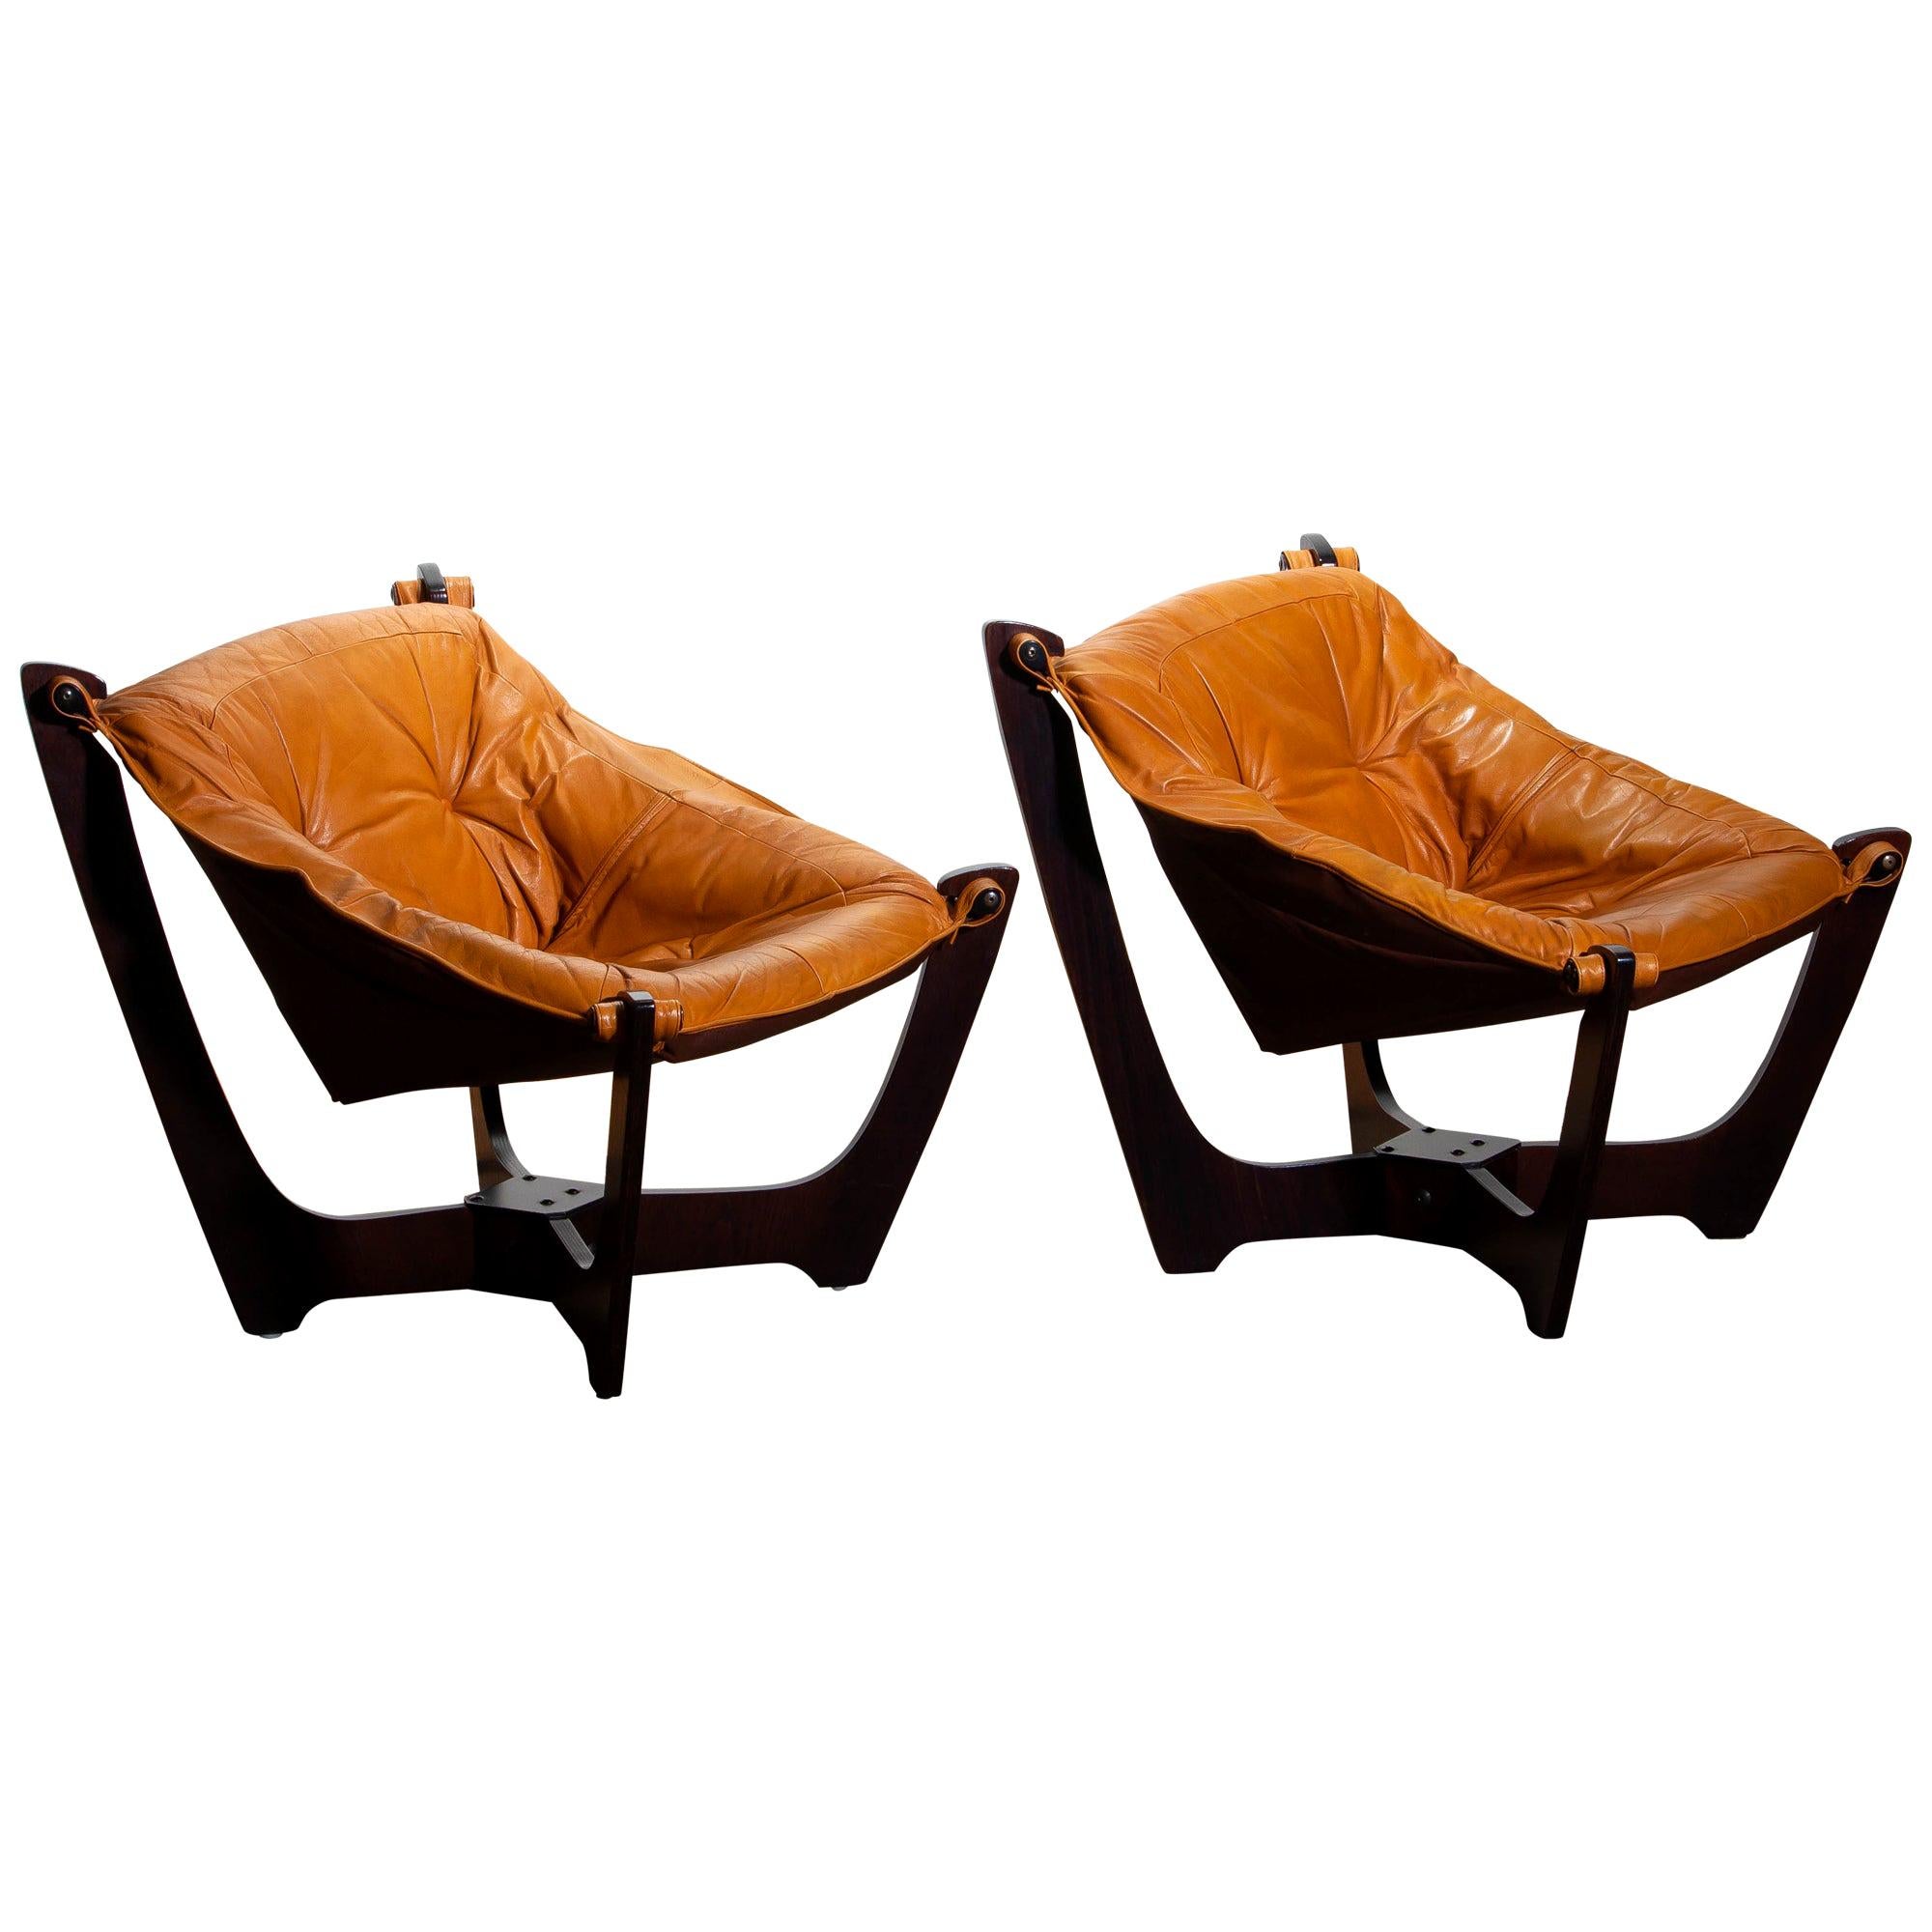 Late 20th Century 1970 Pair of Leather Lounge Chairs by Odd Knutsen for Hjellegjerde Møbler Norway